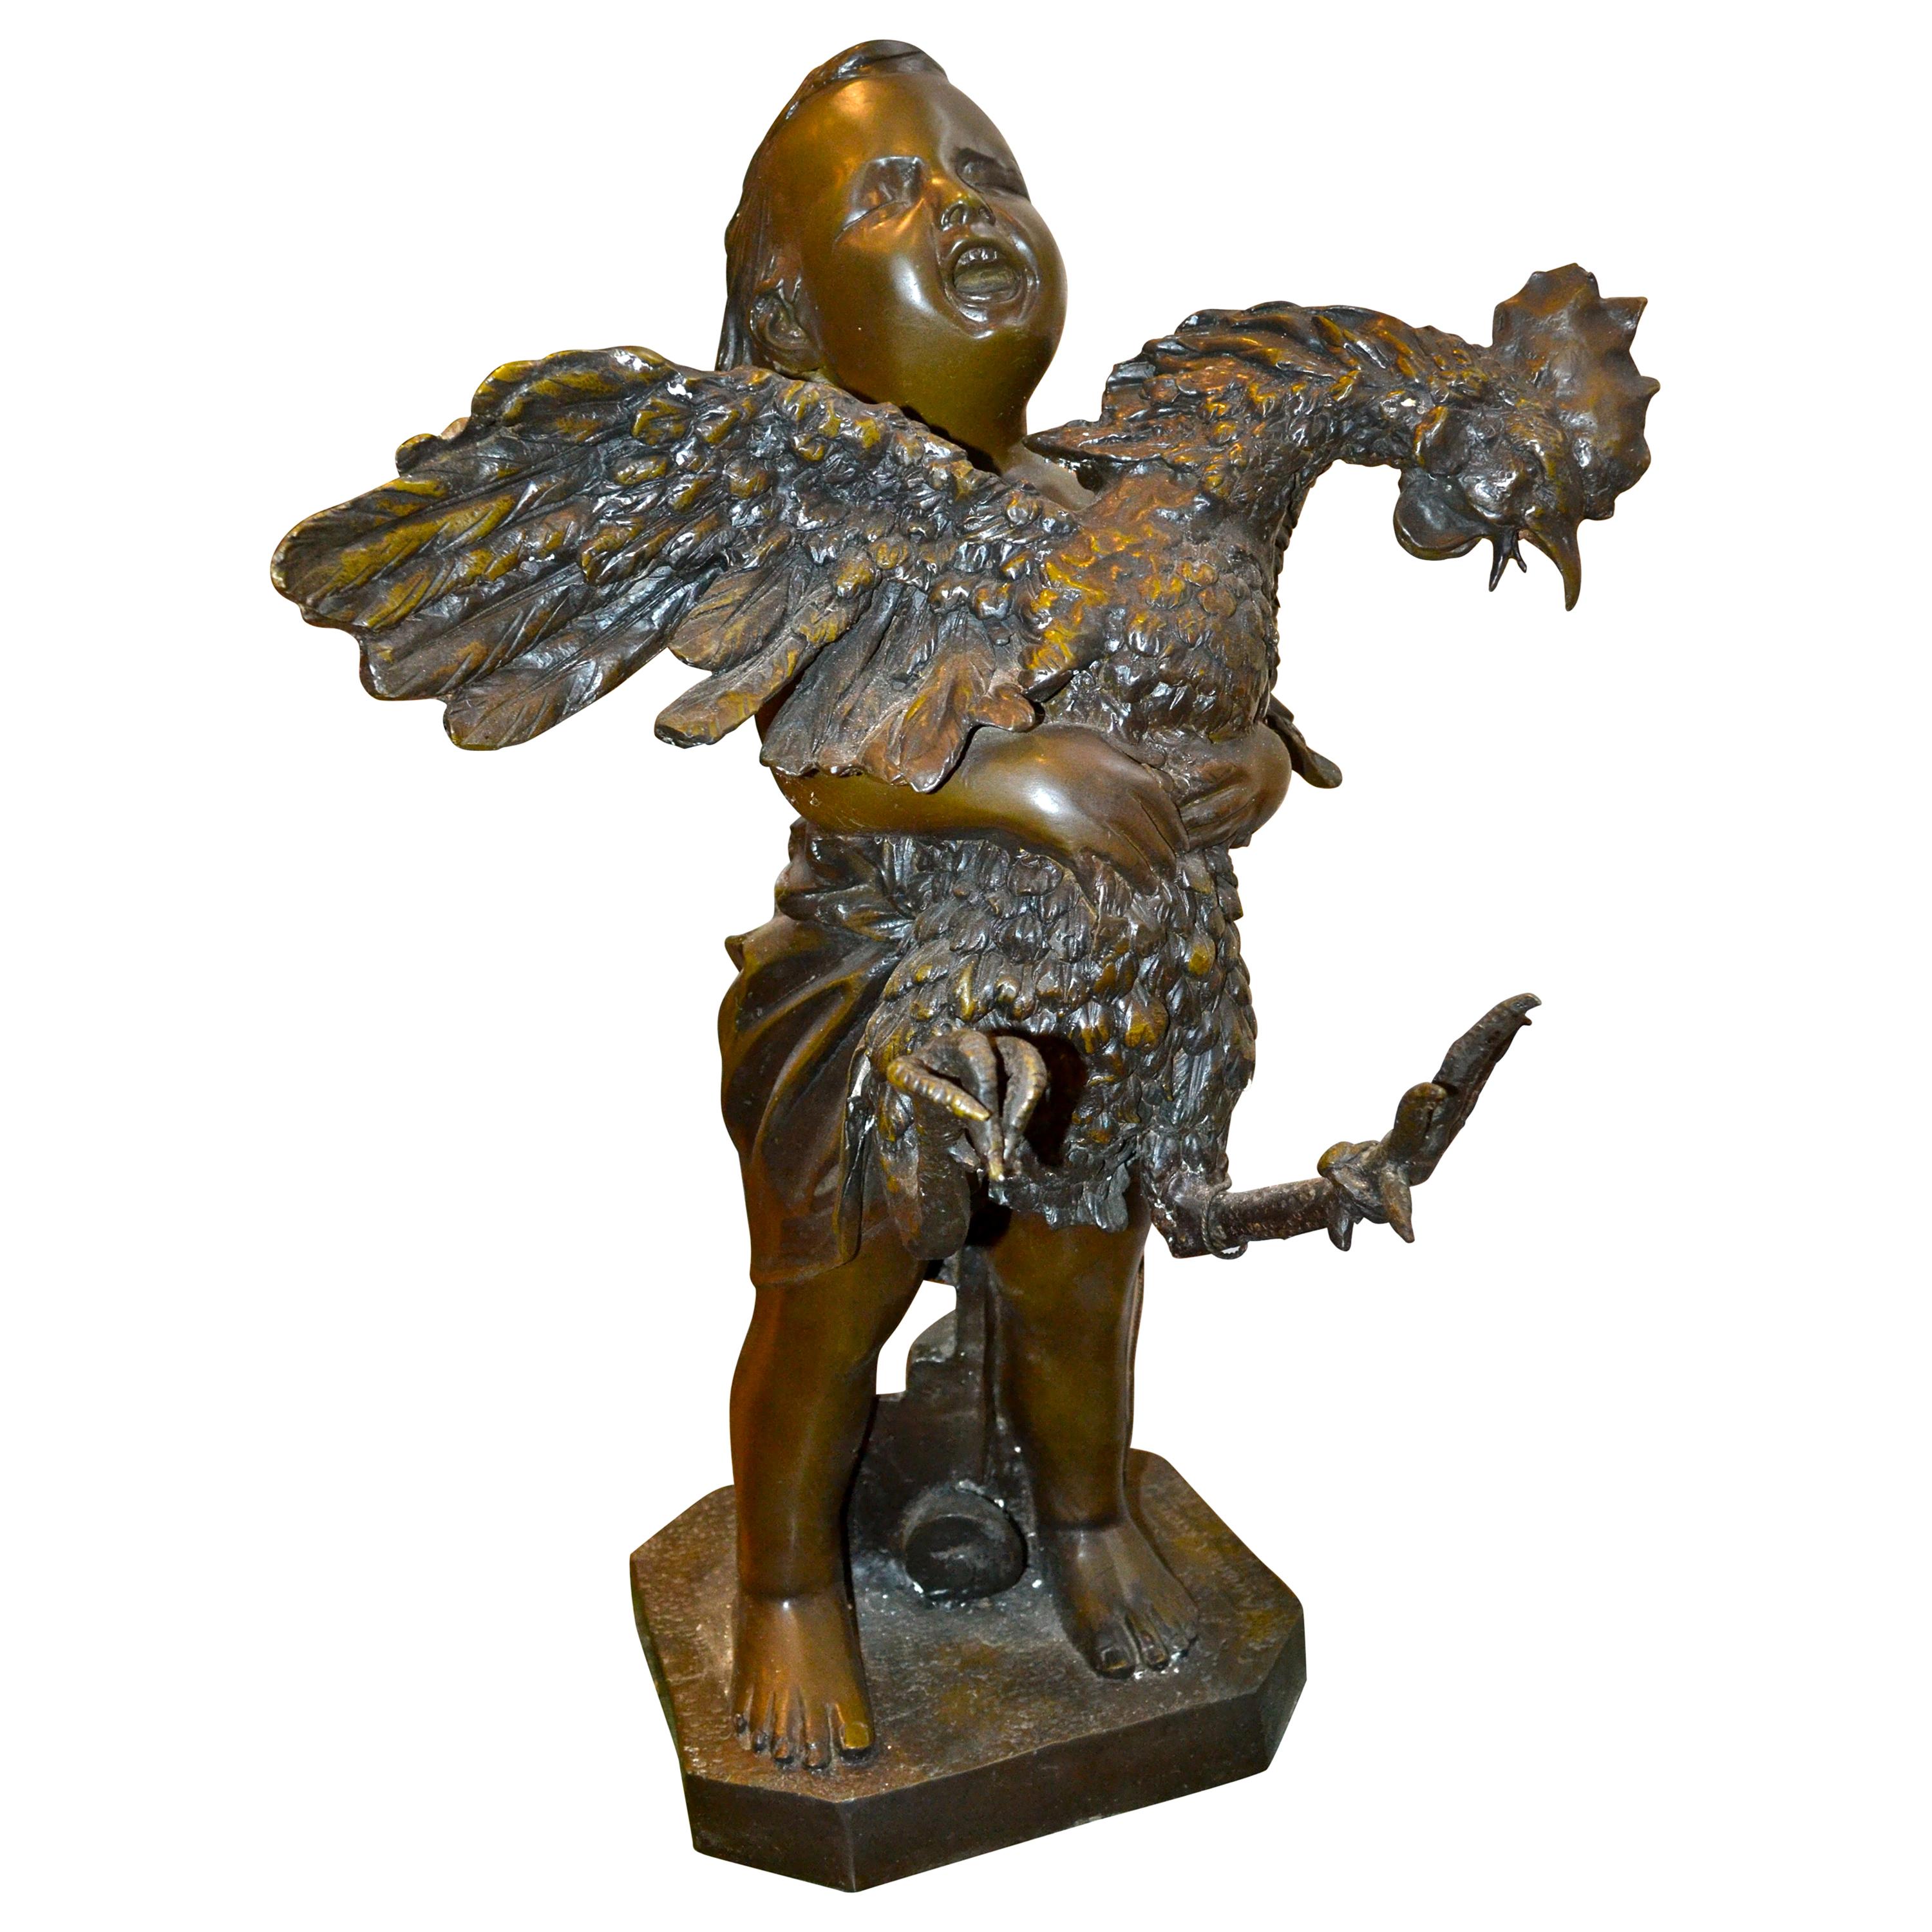  A Bronze Statue of  "Boy with Rooster " after Adriano Cecioni ( 1838-1886)  For Sale